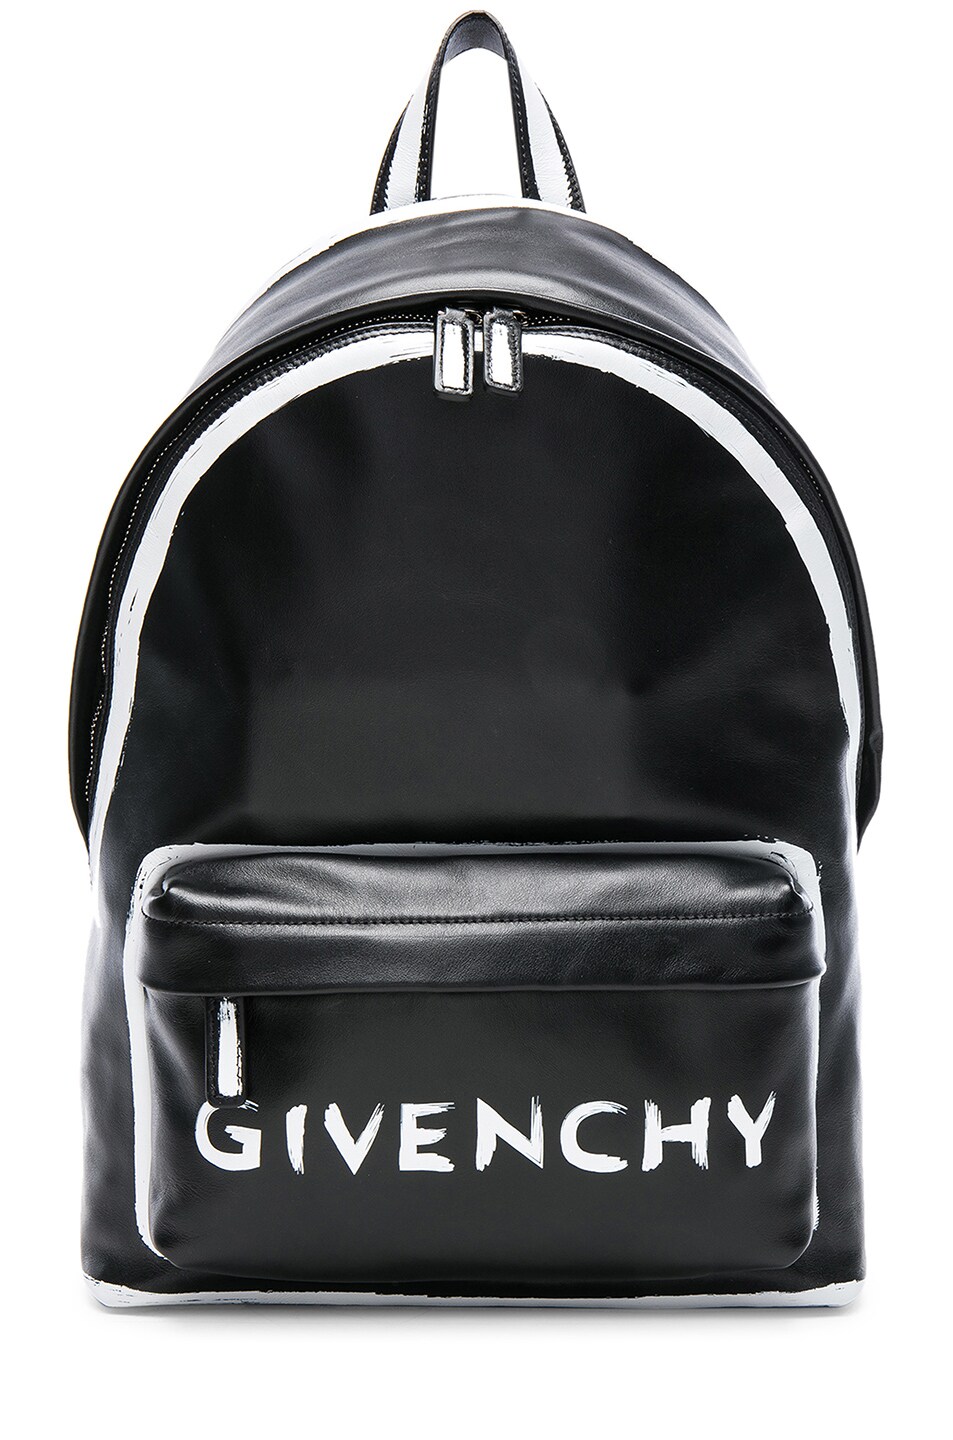 Image 1 of Givenchy Small Leather Graffiti Print Backpack in Black & White